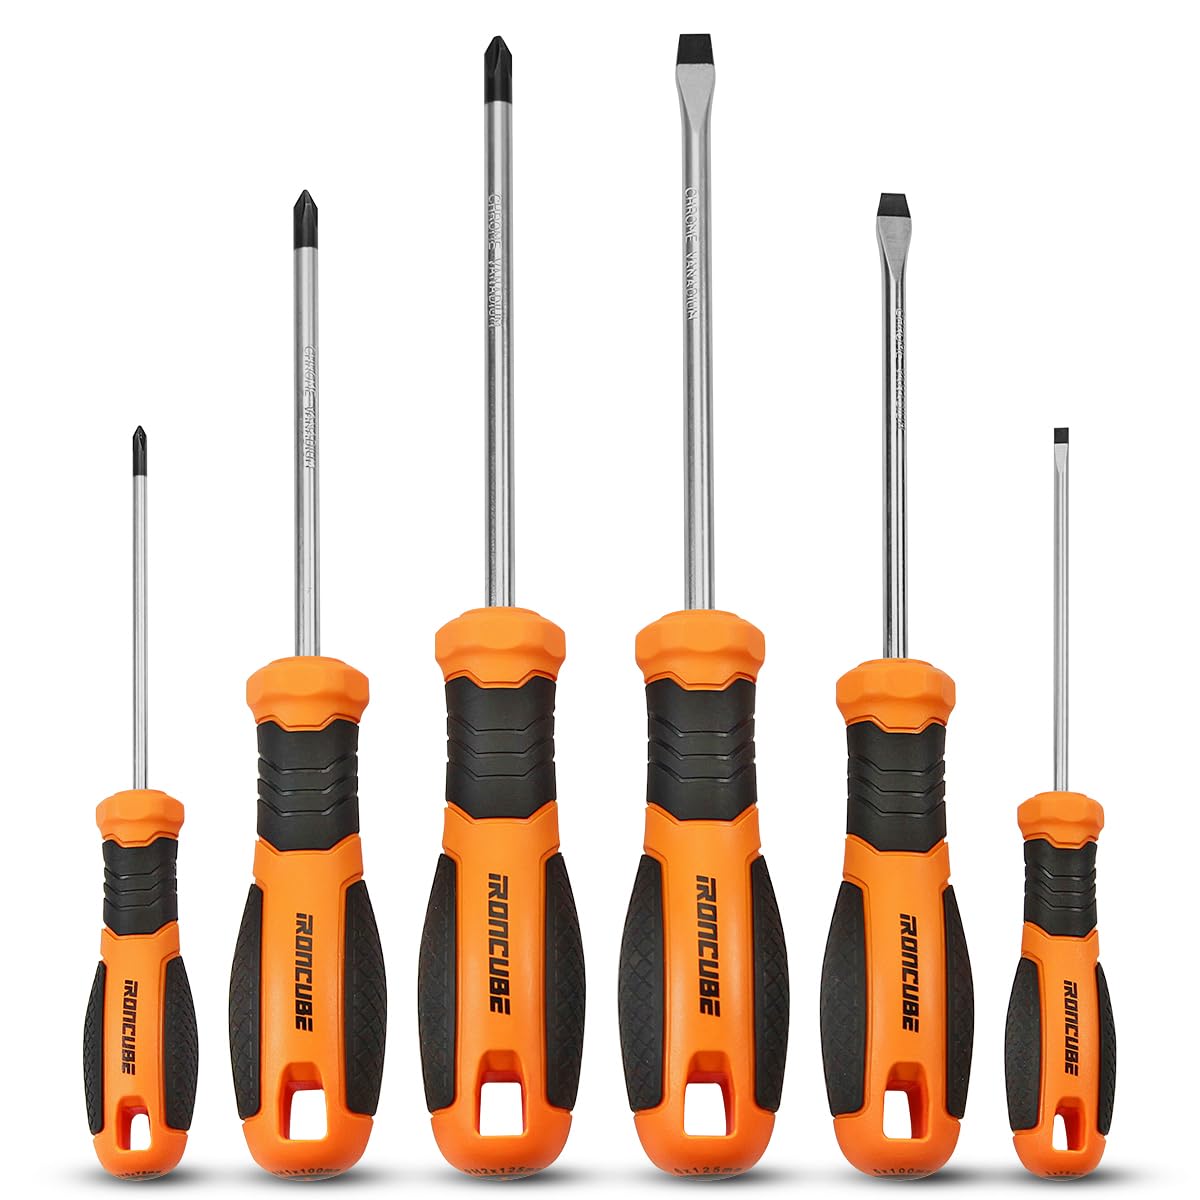 IRONCUBE 6 PCS Magnetic Tips Screwdriver Set, Phillips/Slotted Heads, Comfort Grip, Durable CR-V Steel, Multi-Spec for tightening screws fastener, gifts for men father or DIY lover